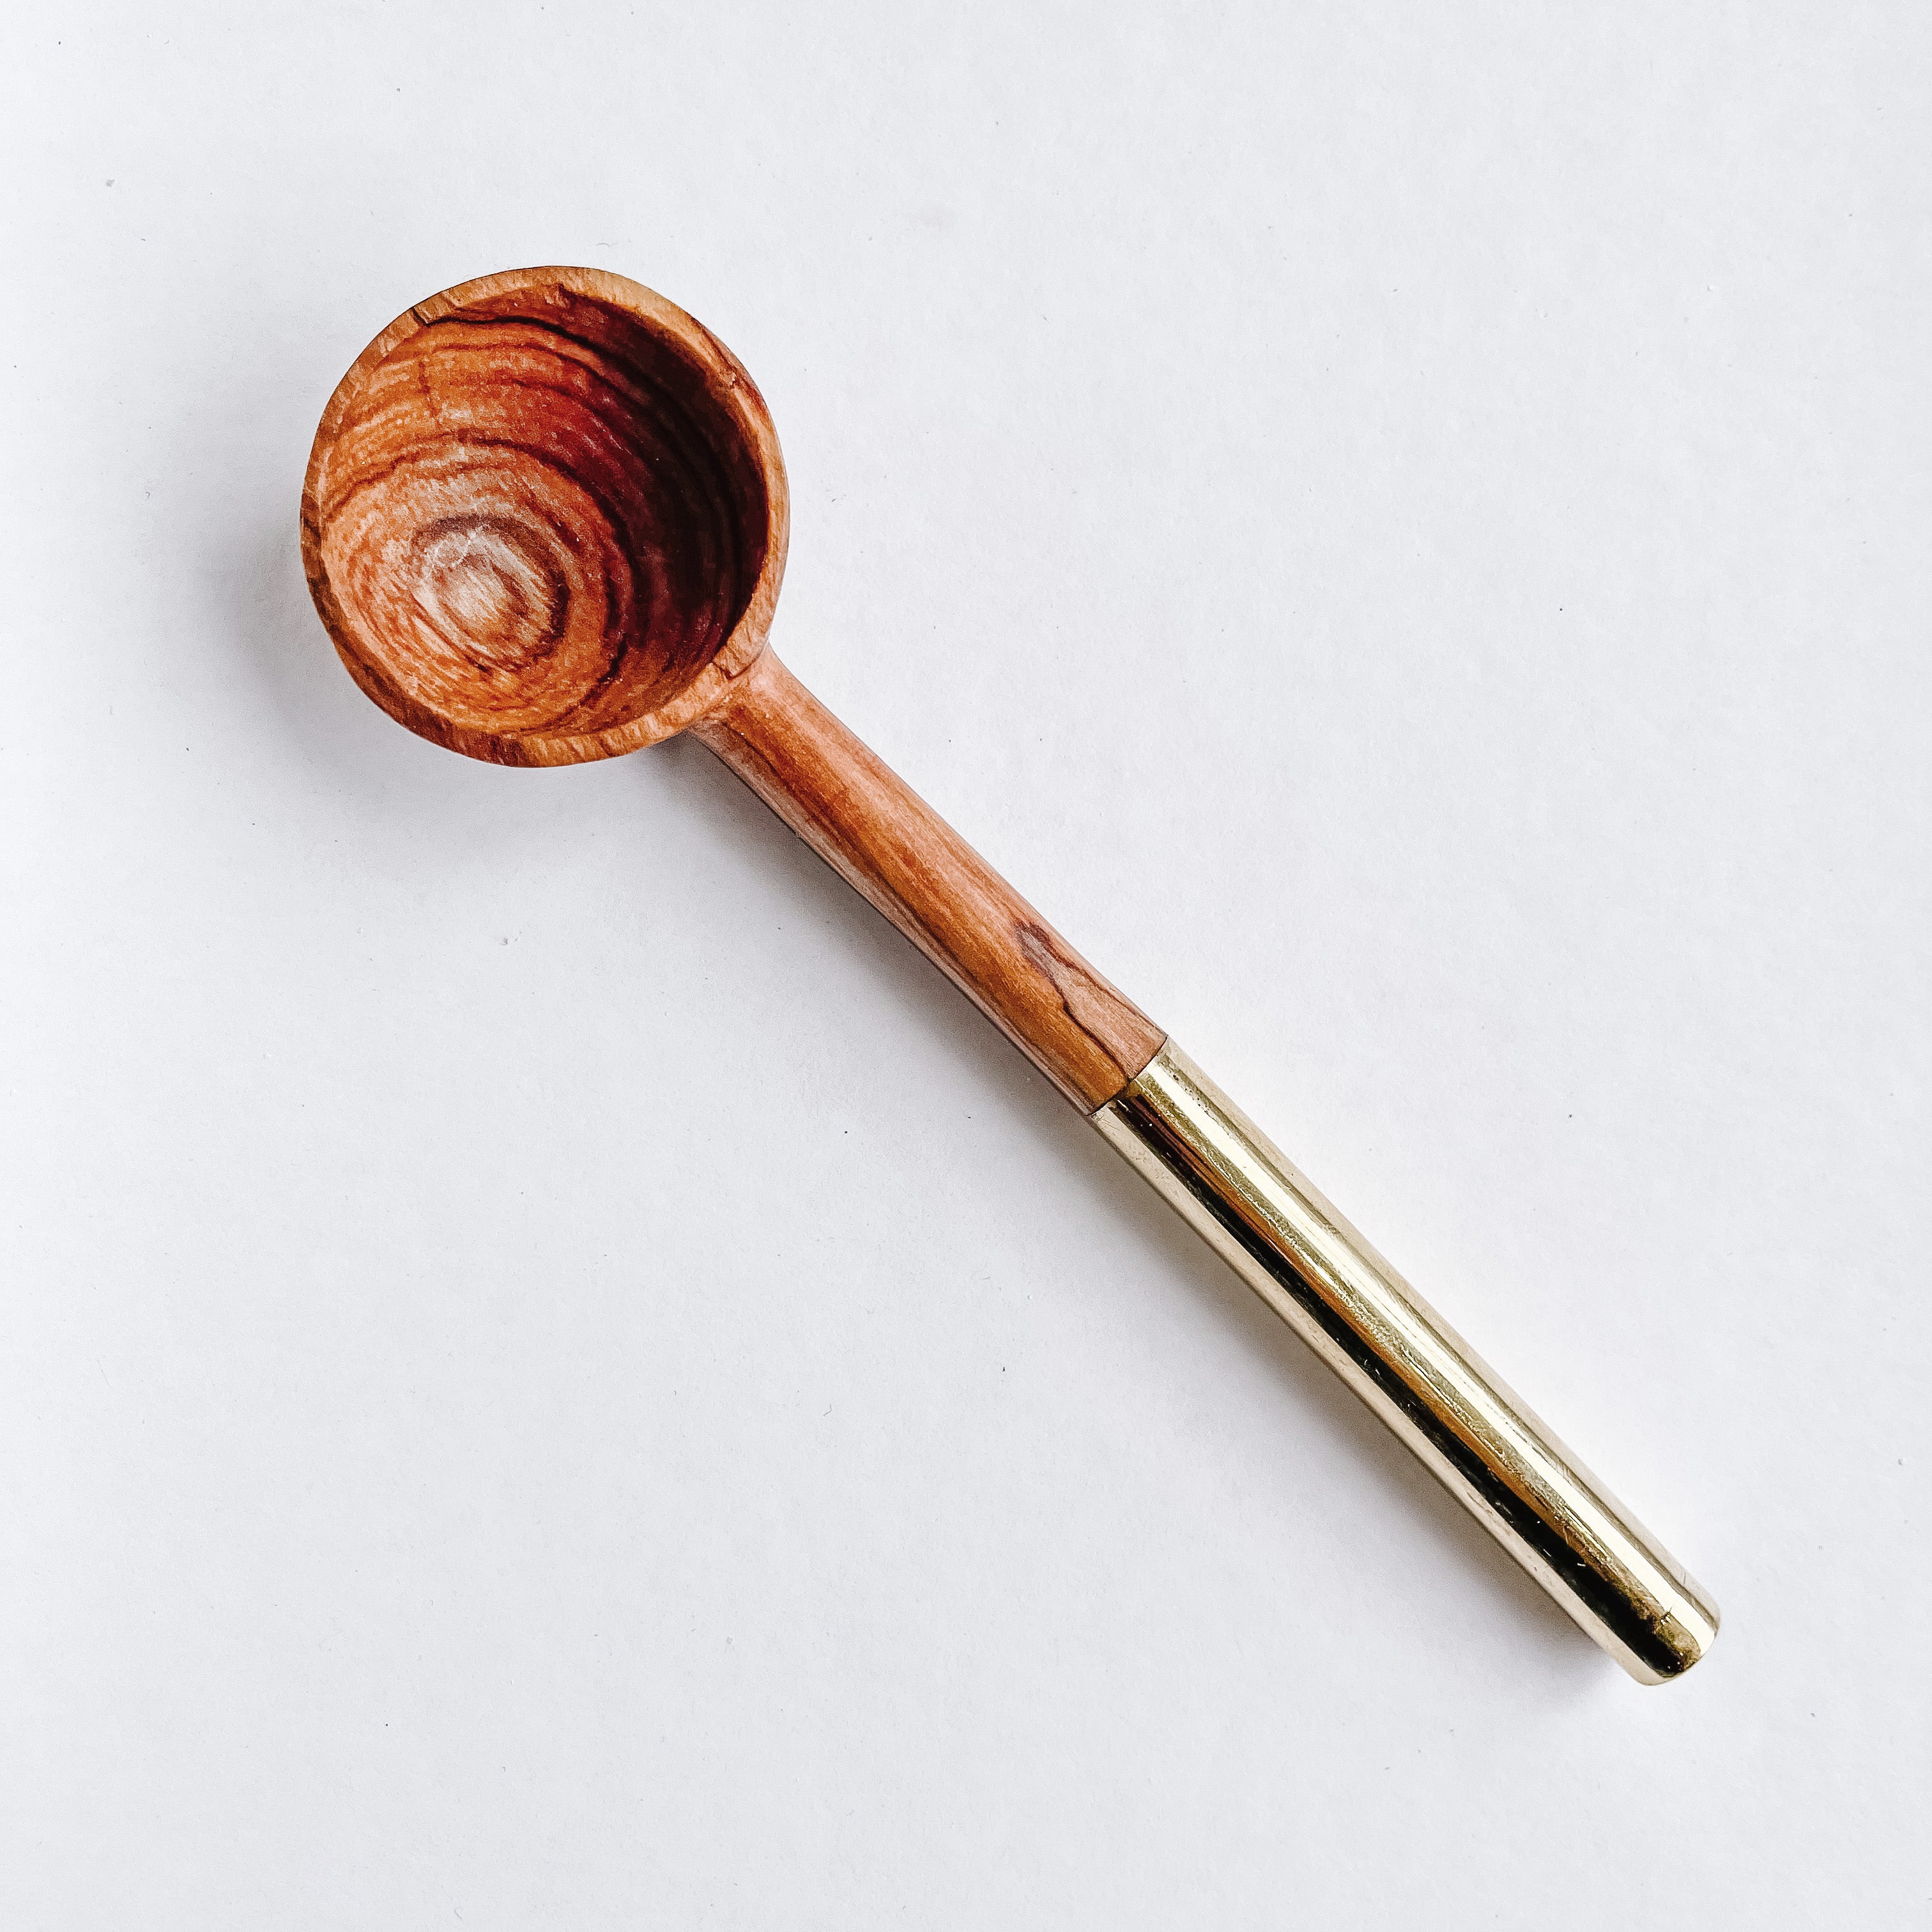 JustOne's small handcrafted, wooden, coffee spoon with handle made of recycled brass, made in Kenya